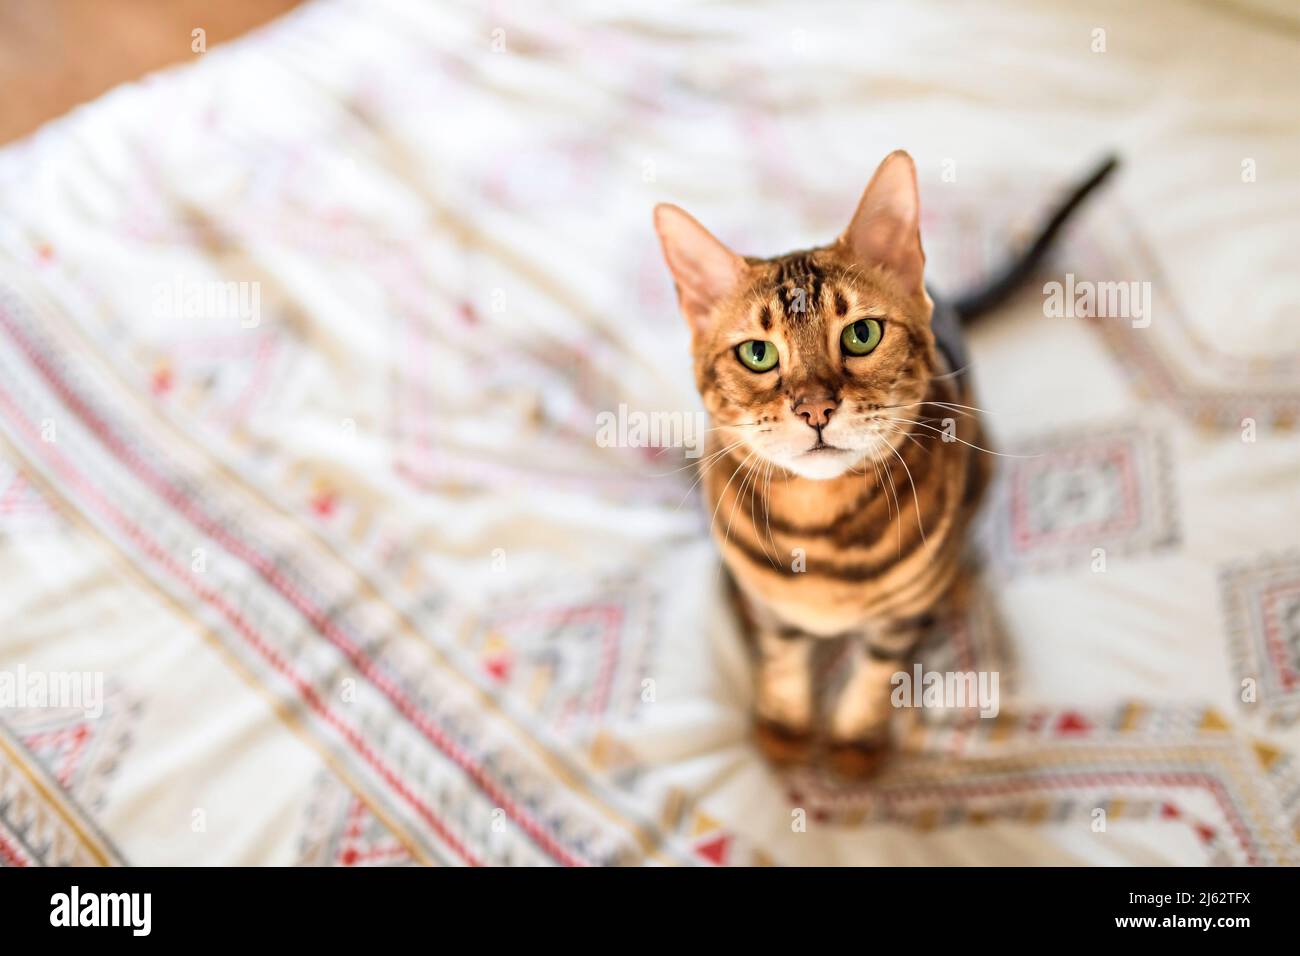 Bengal cat like a leopard sneaks at home bedroom Stock Photo